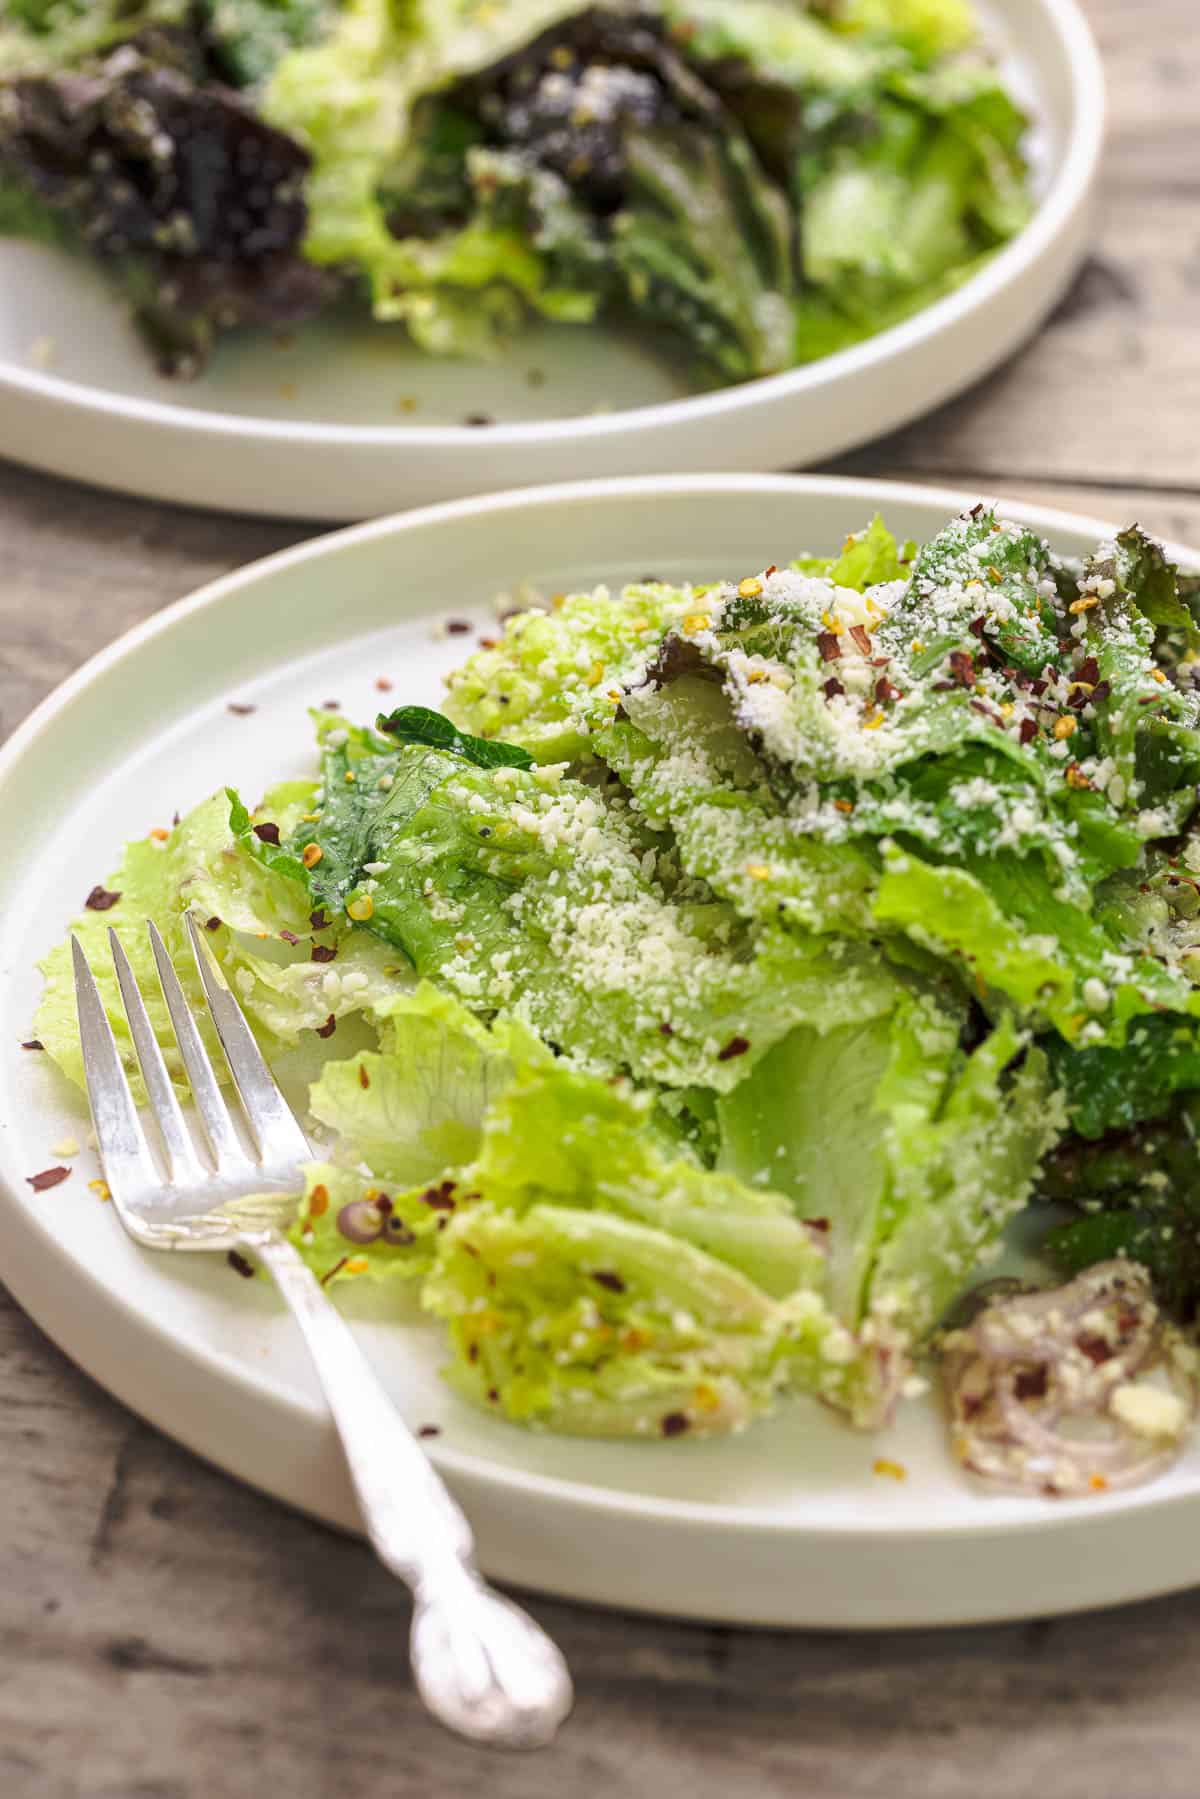 Lettuce salad with romaine and red leaf lettuce, parmesan, lemon zest, and red pepper flakes on a plate.